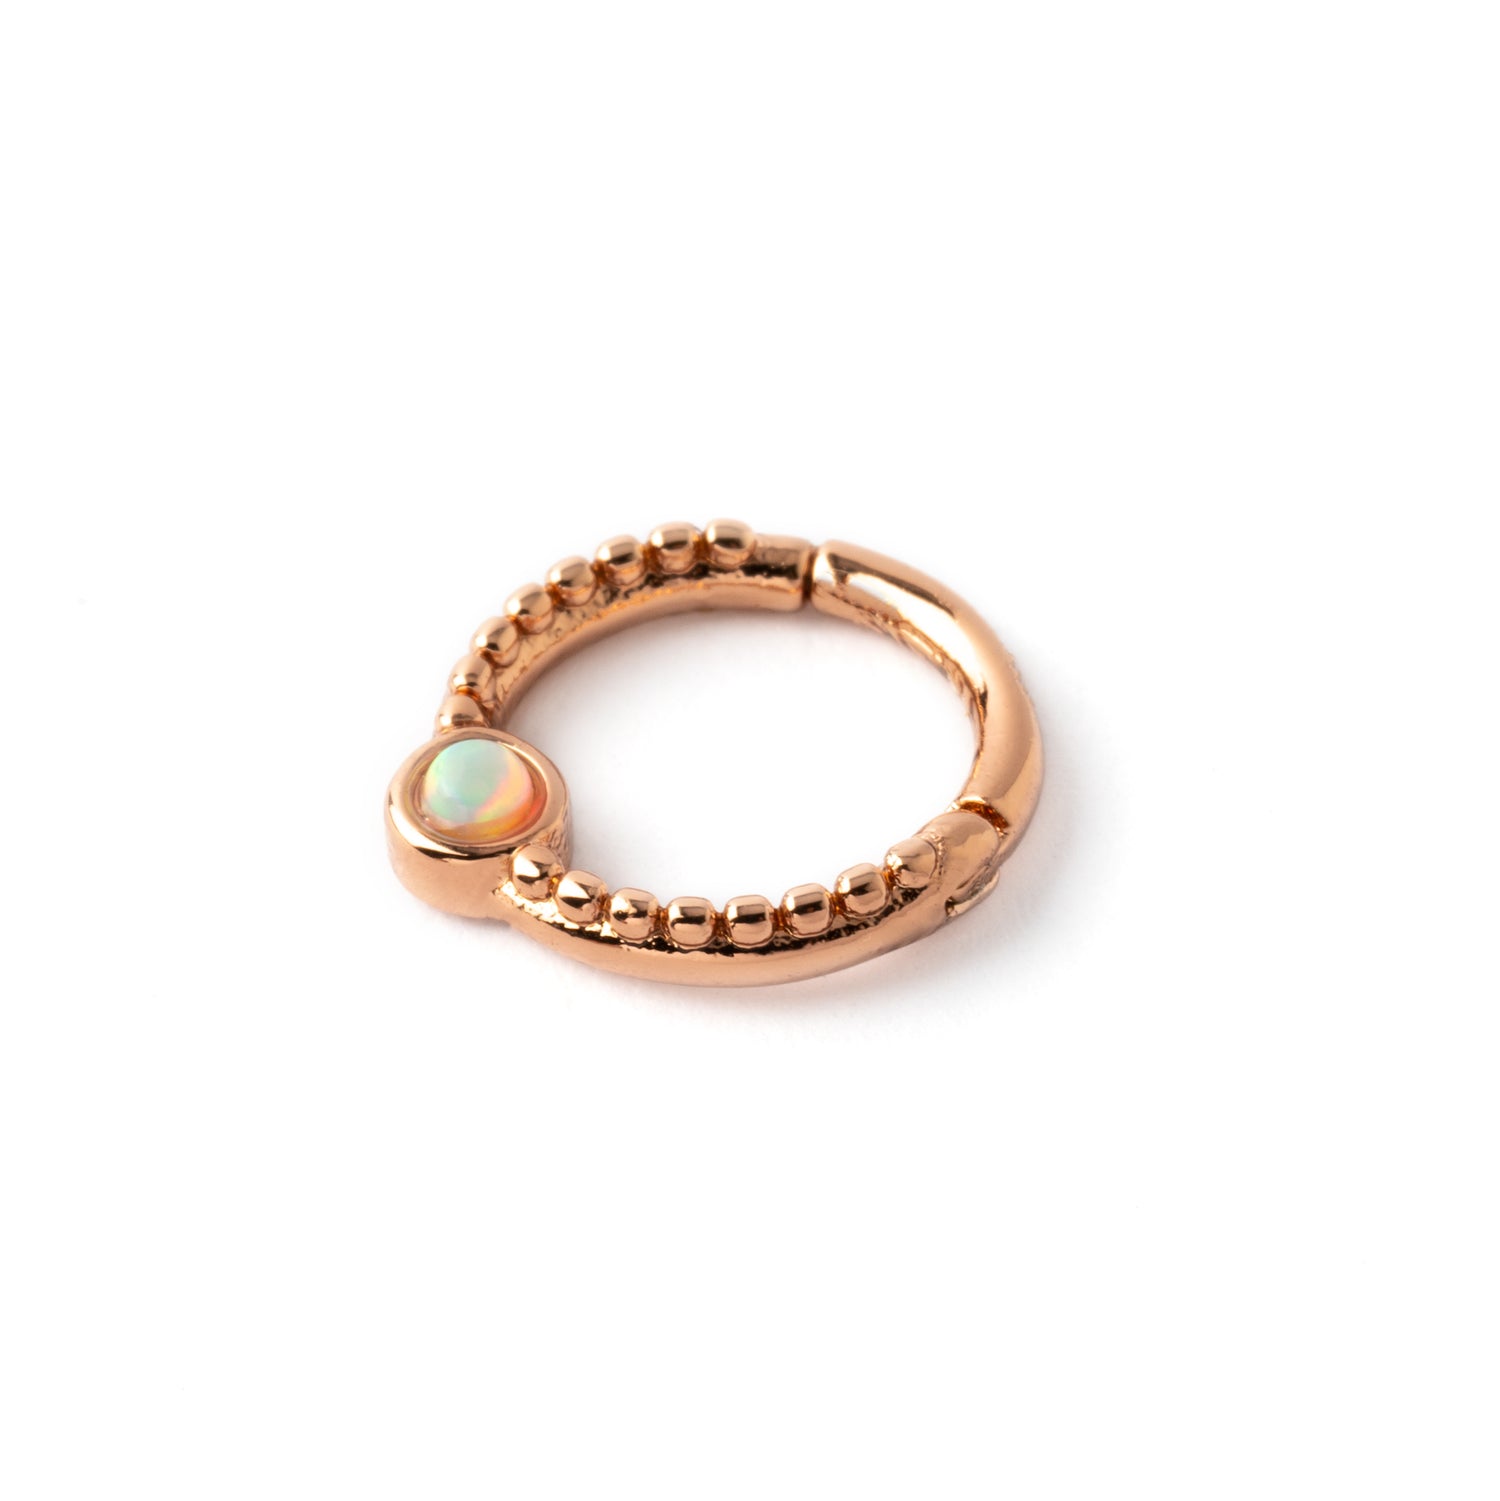 Dayaa rose gold surgical steel septum clicker with white opal side view